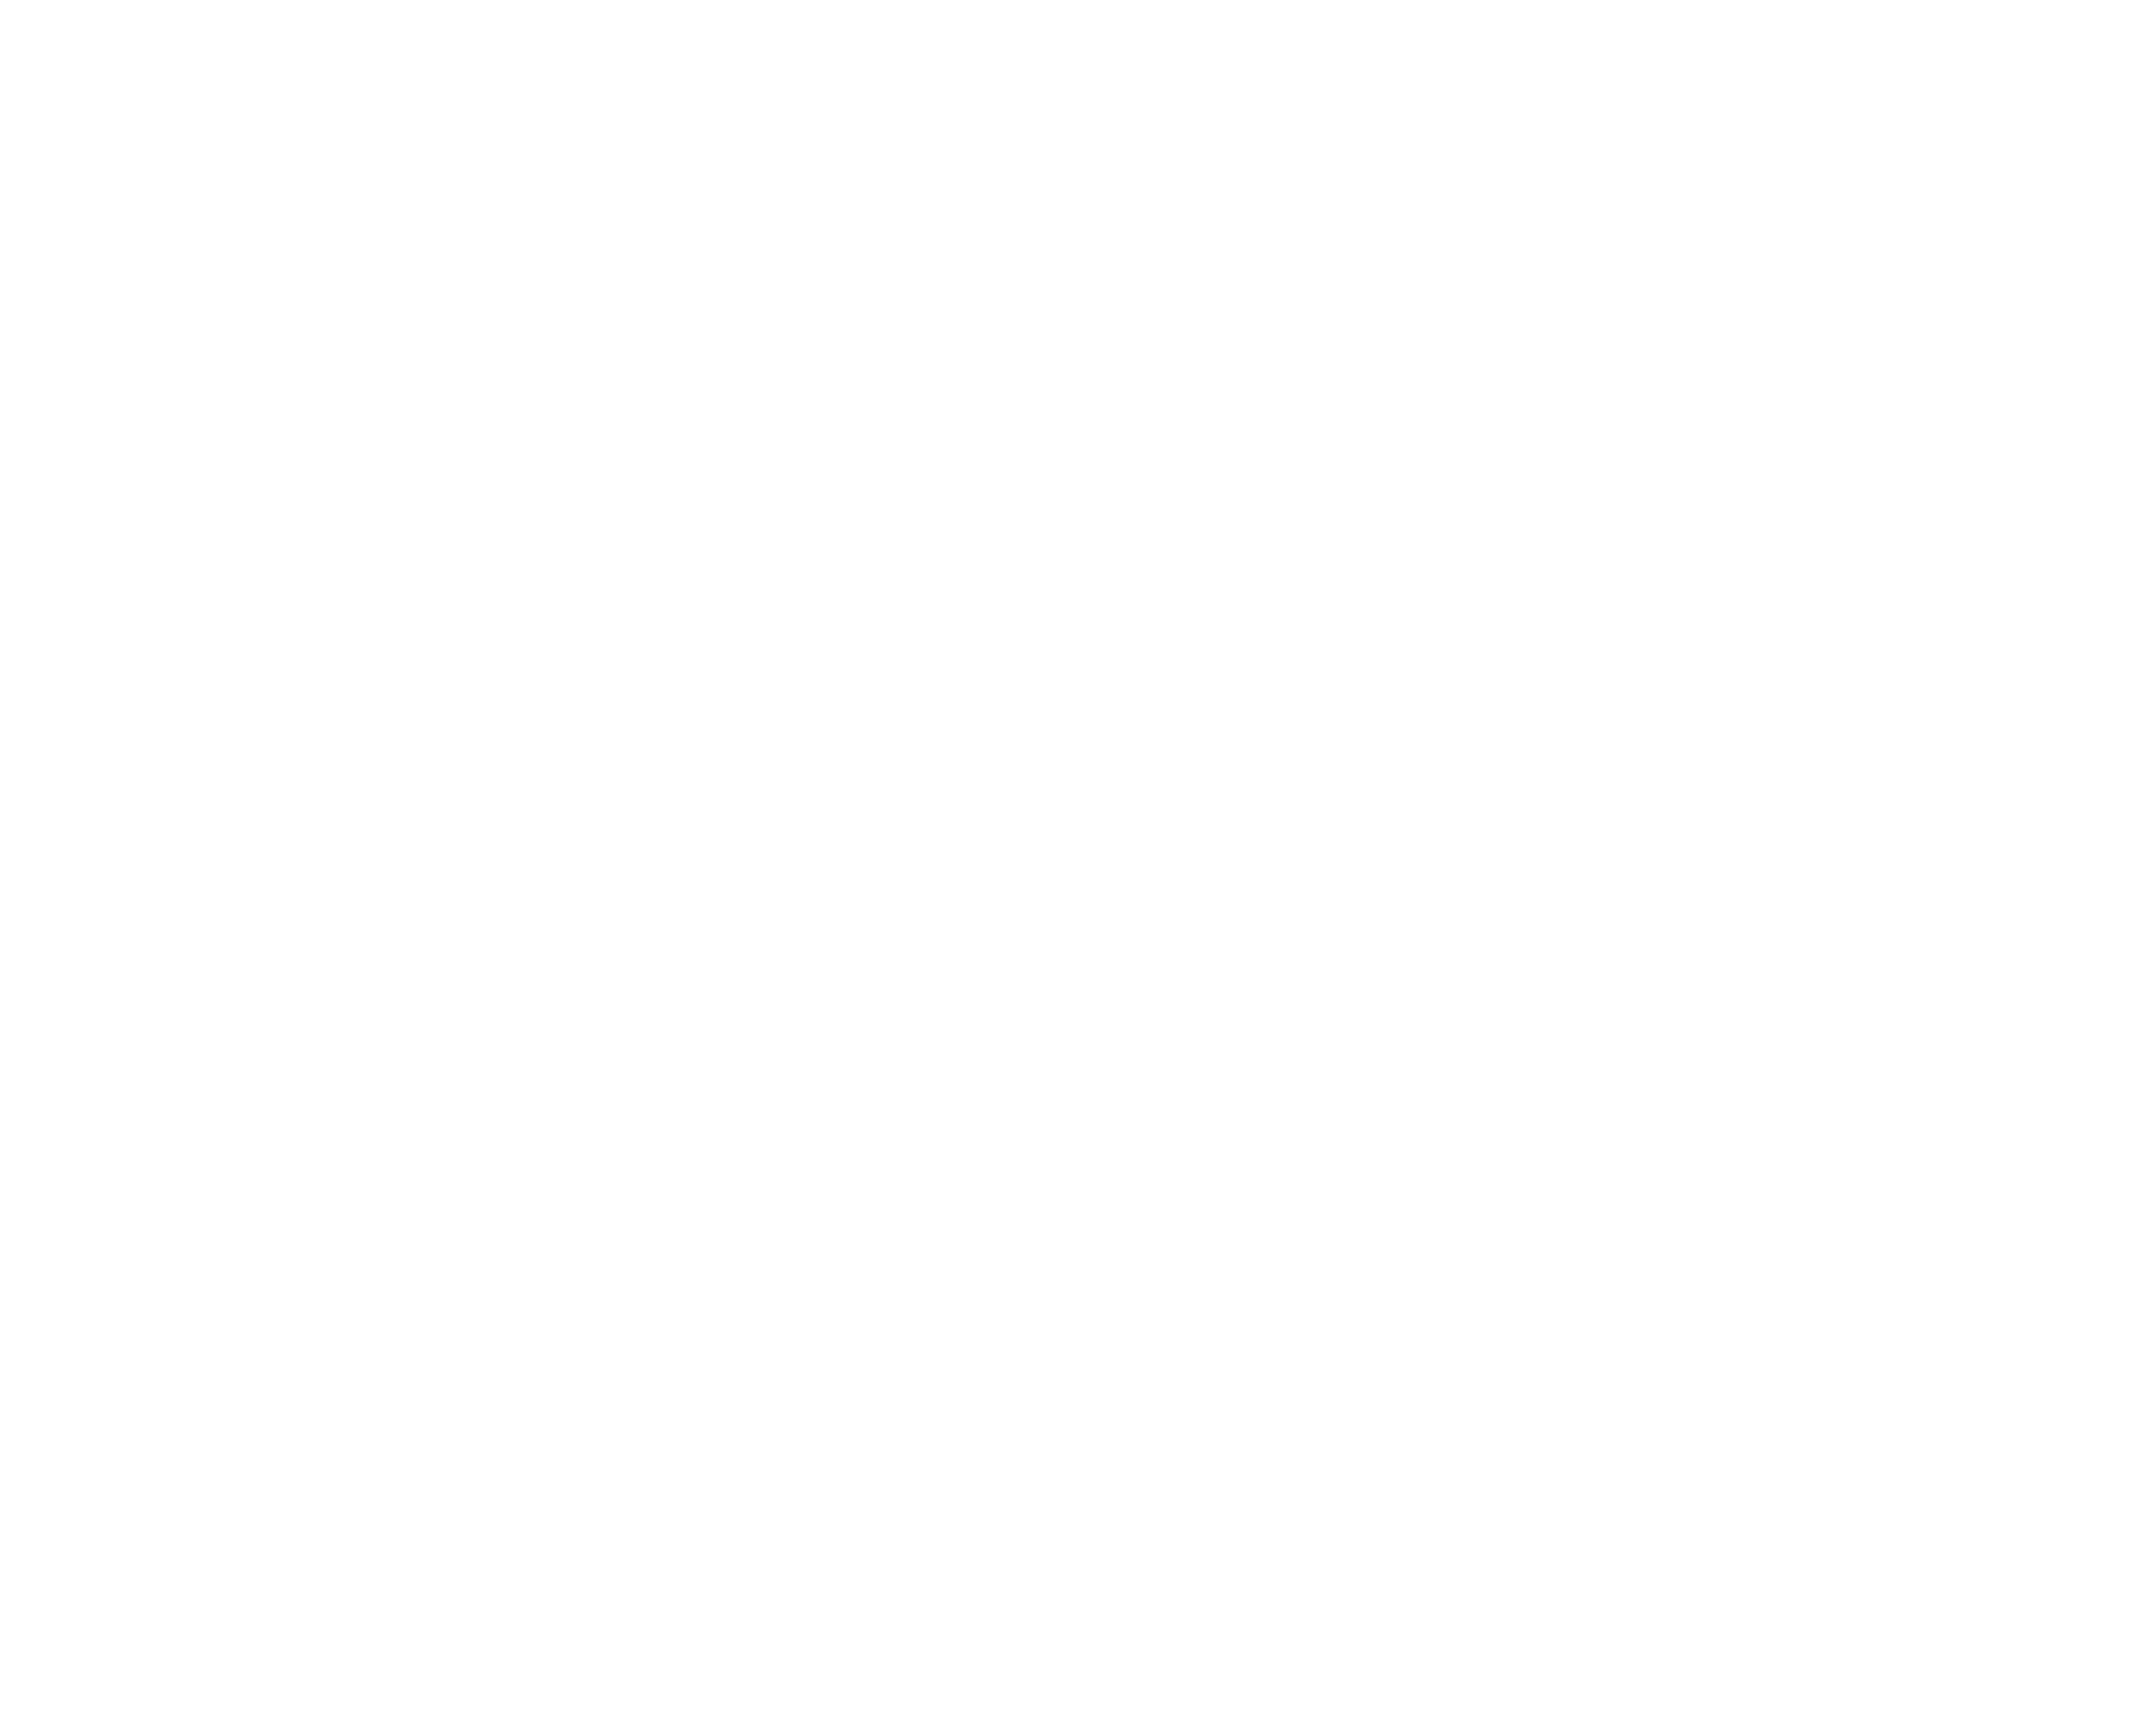 HT Global Industries Limited